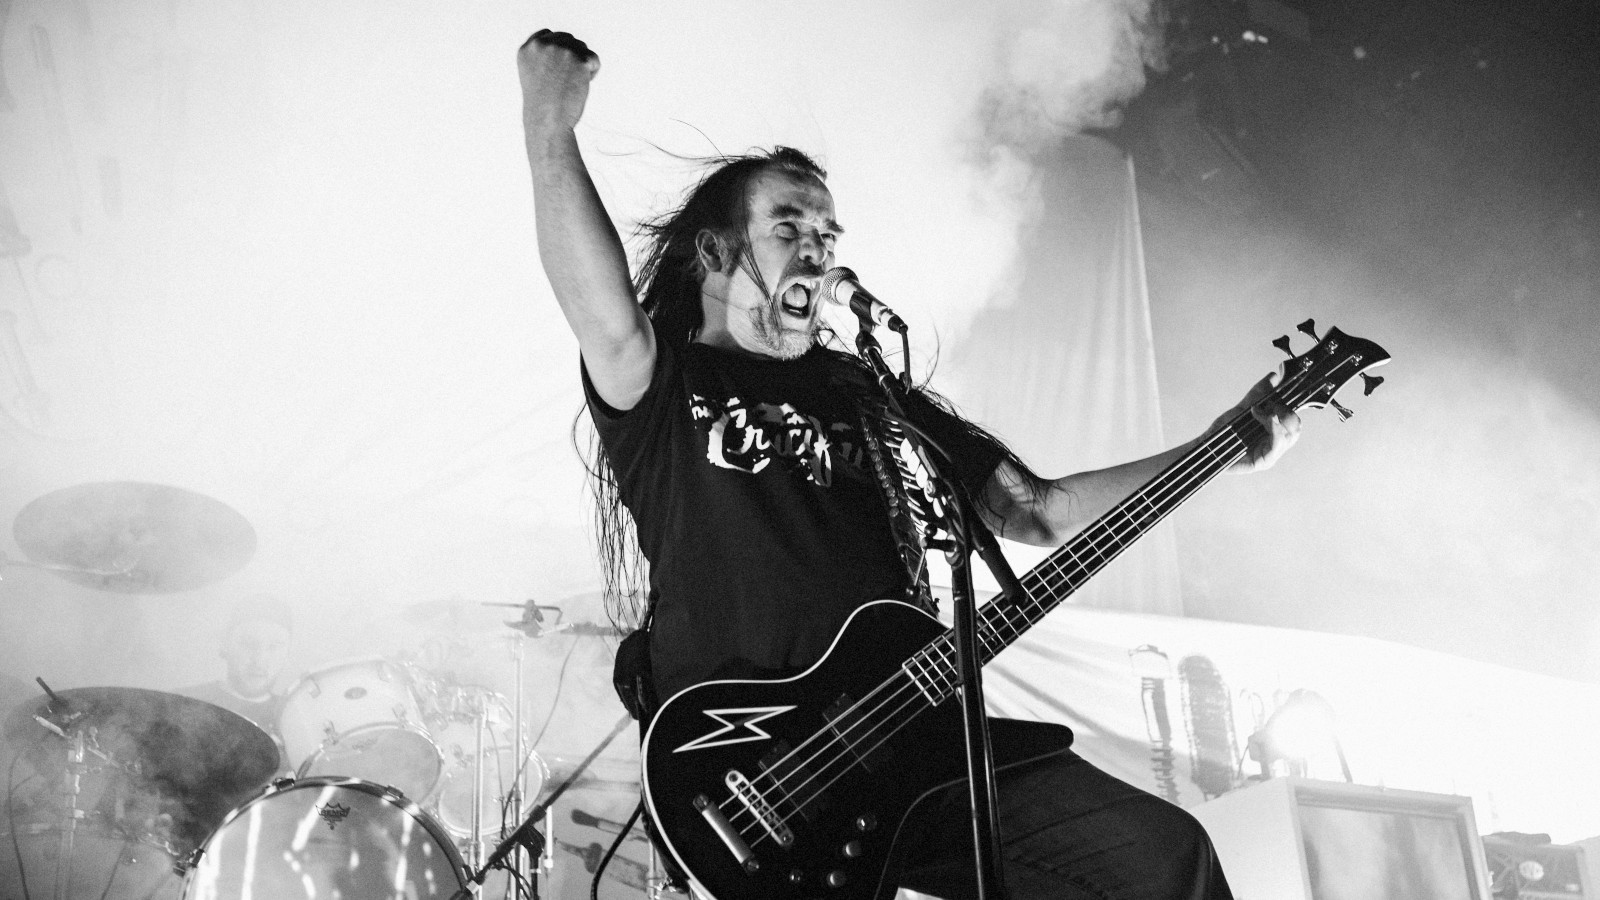 CARCASS announce North American headlining tour with MUNICIPAL WASTE